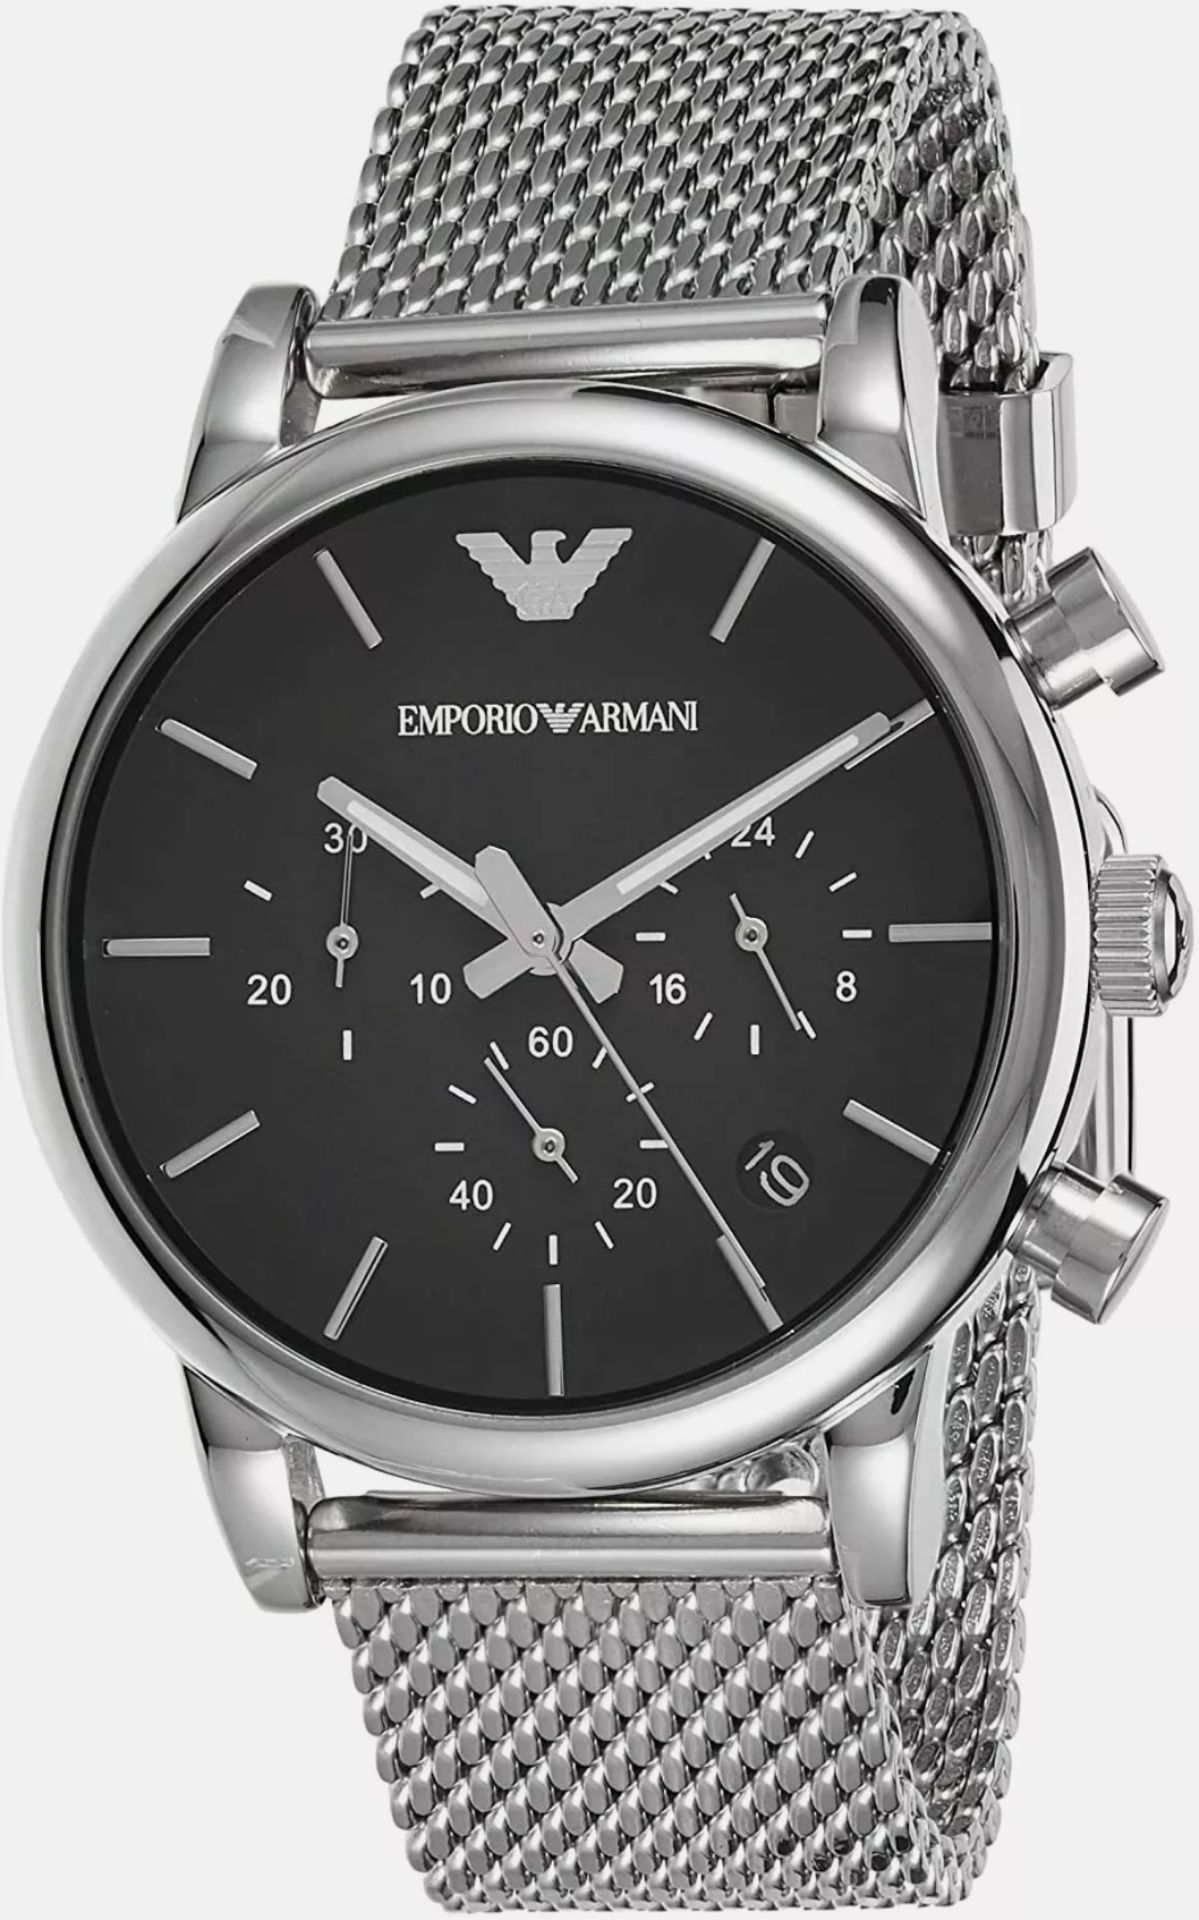 ** TRADE LOT 9 ** A Total of 21 Brand New emporio Armani & Michael Kors Watches - Image 9 of 21